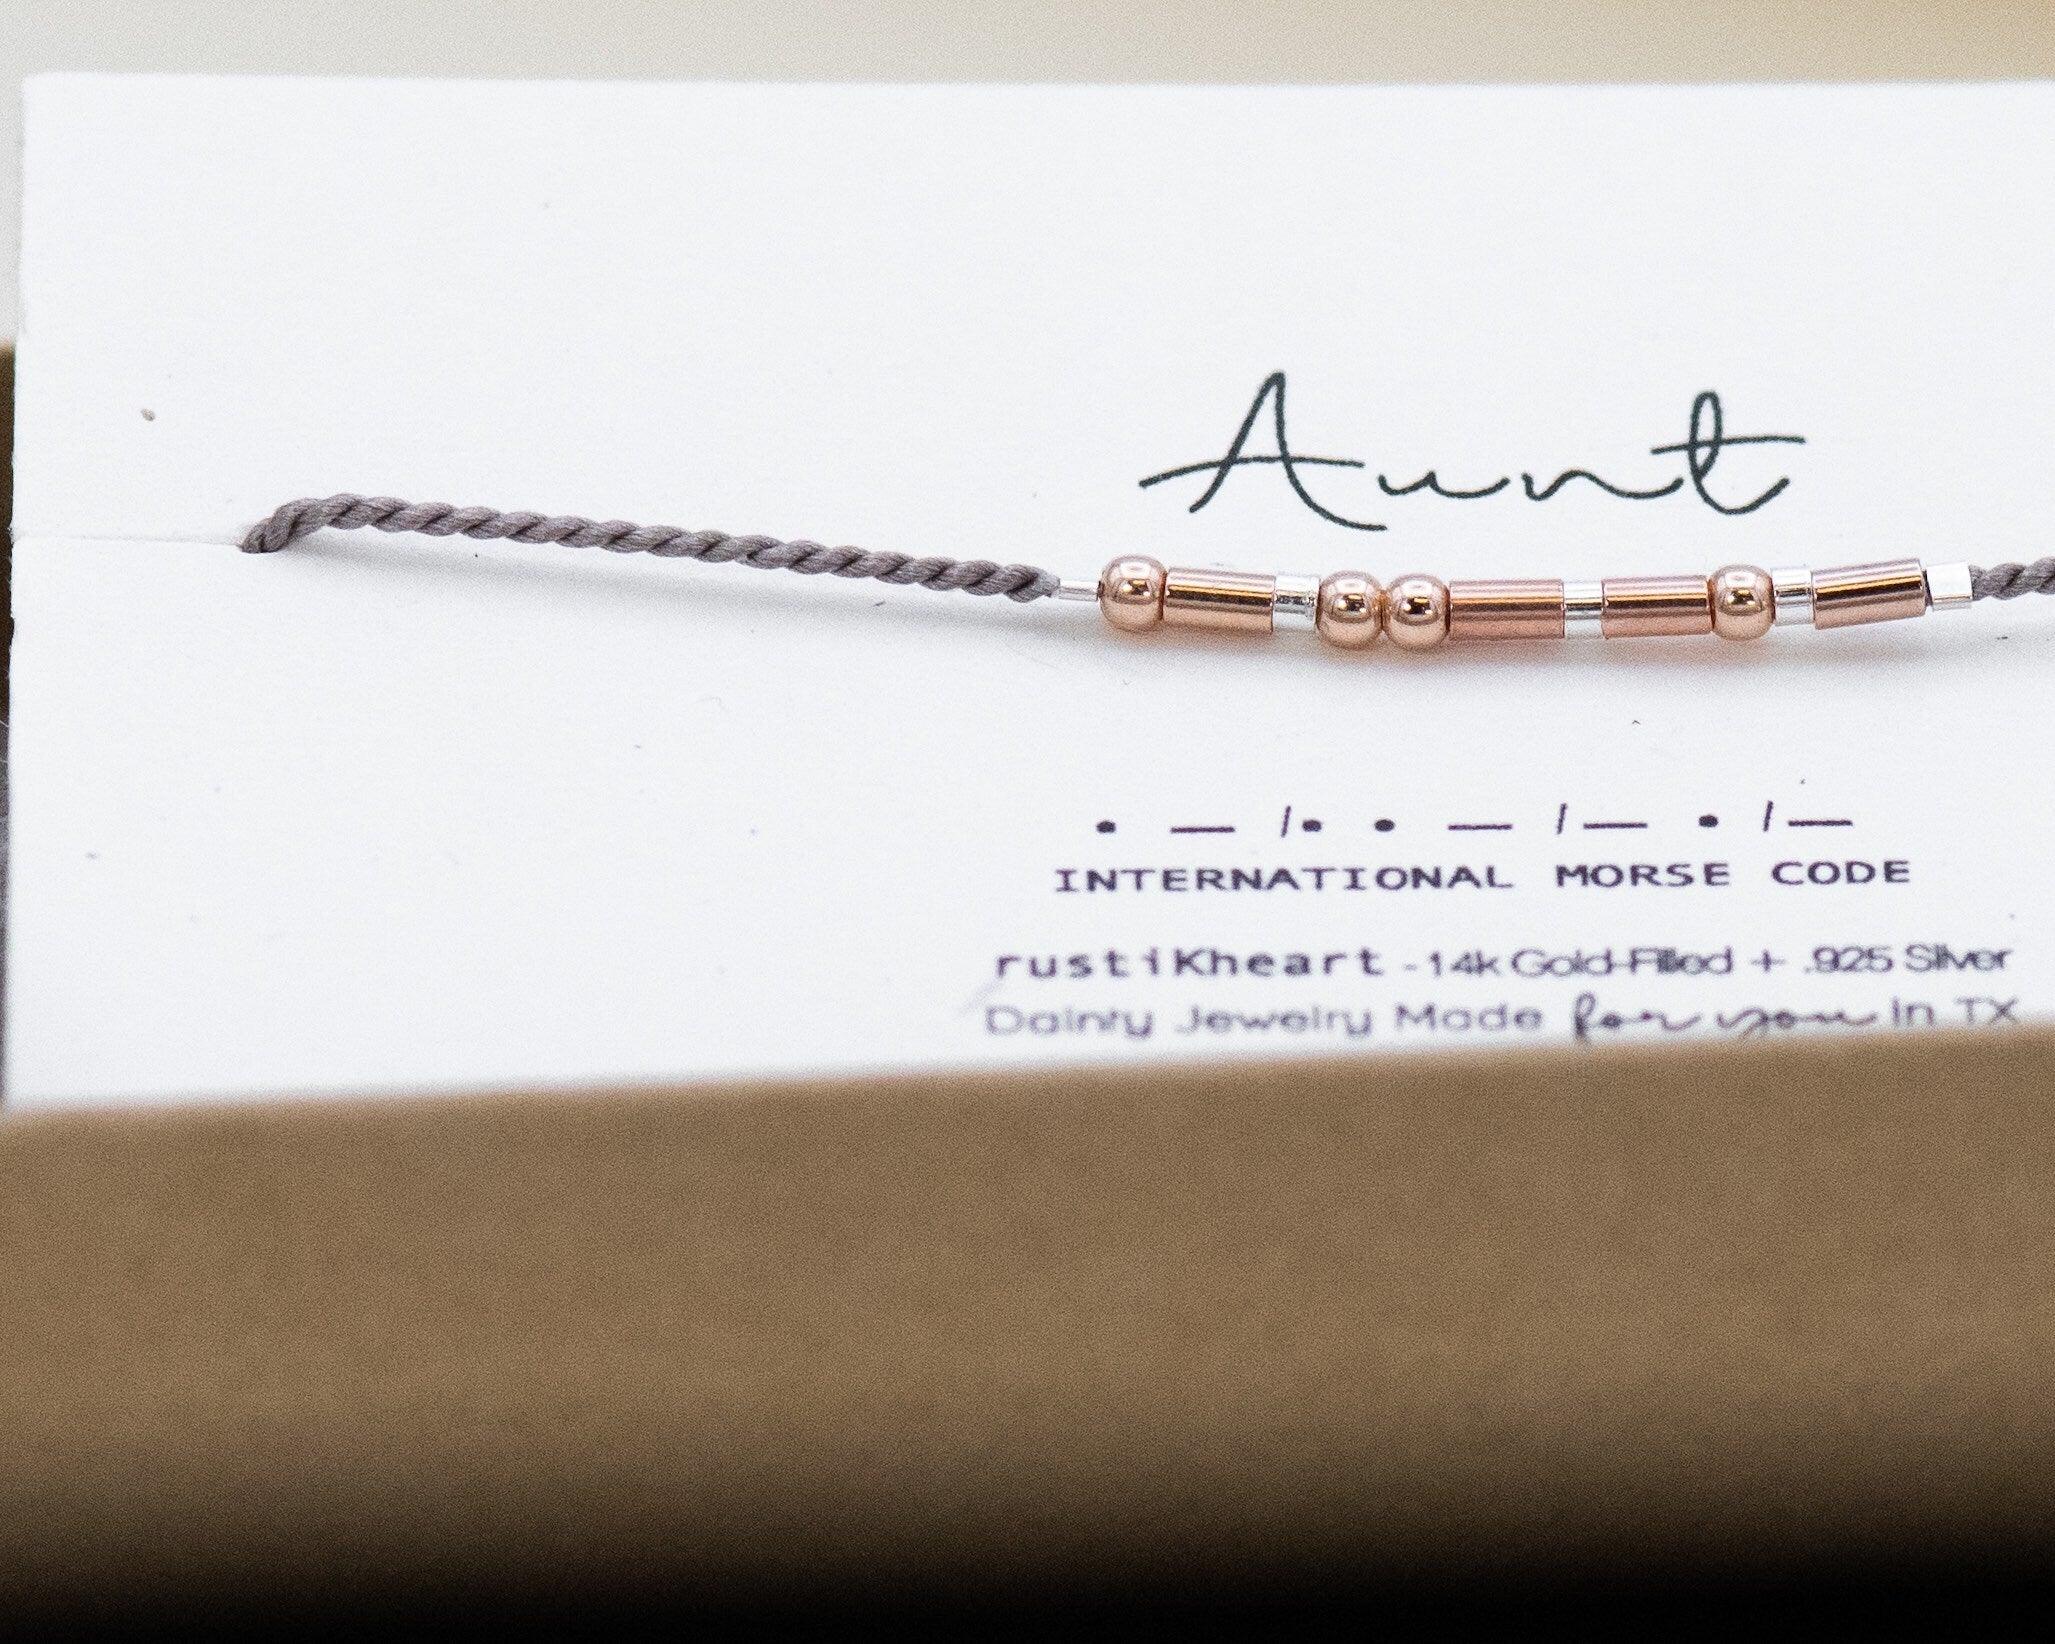 Aunt Morse Code Bracelet • AX.RS.RT.S1 - Morse and Dainty